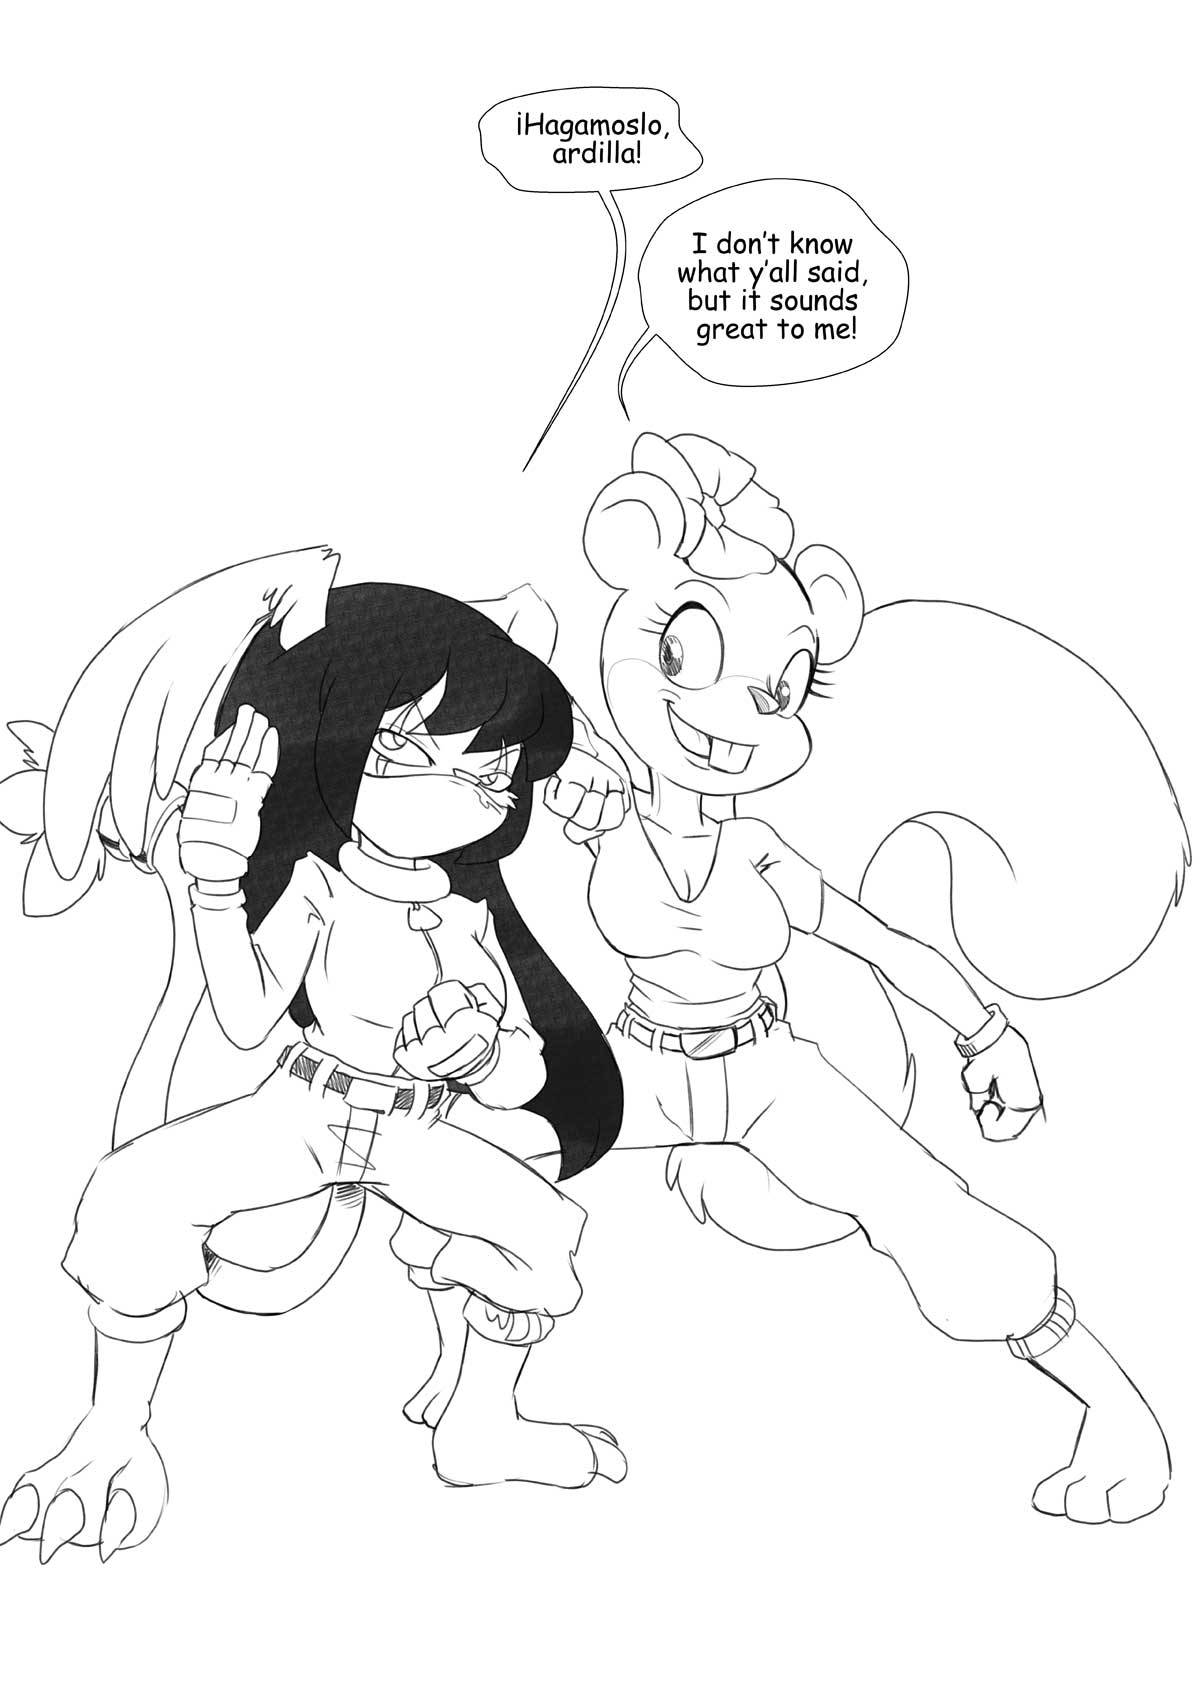 Sandy and GabbySketch Stream Commission for wCP of his Gabby and Sandy Cheeks, getting